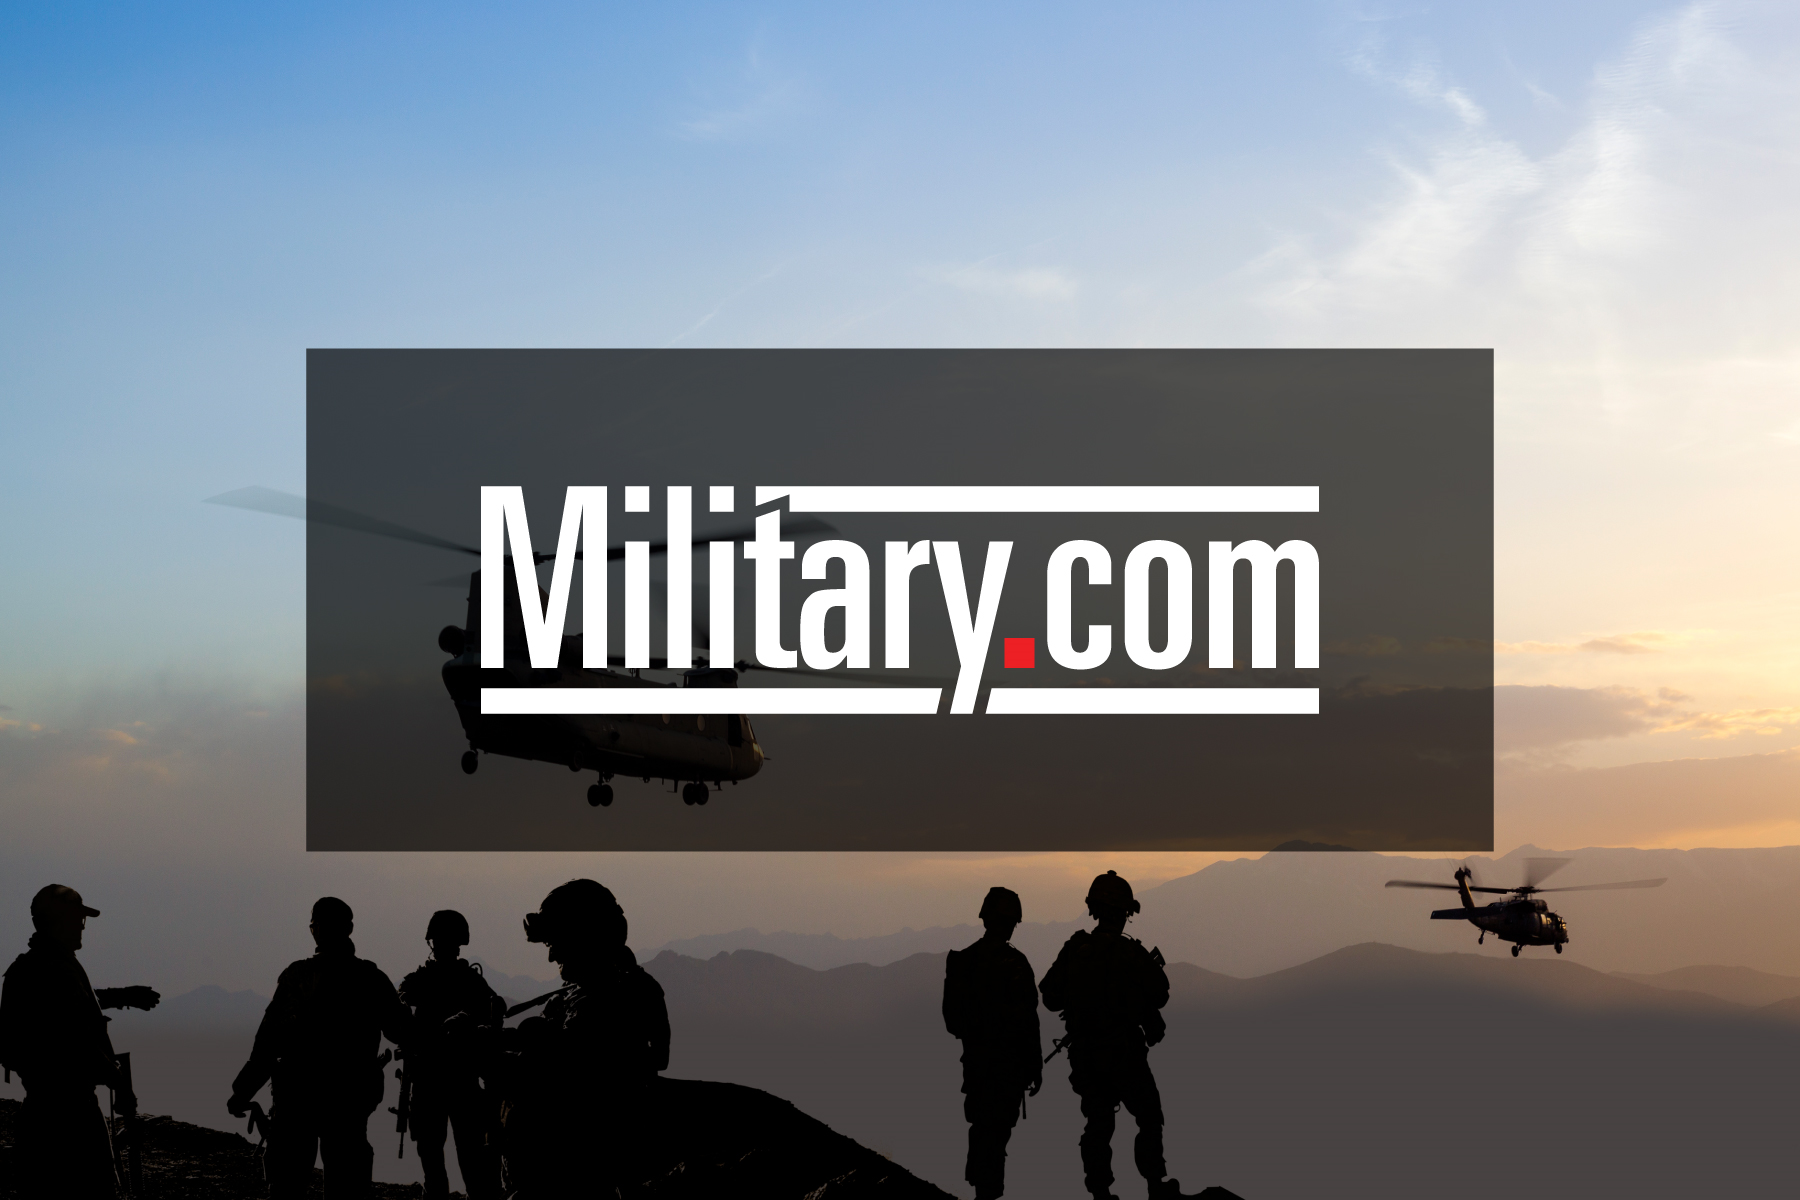 travel discounts military